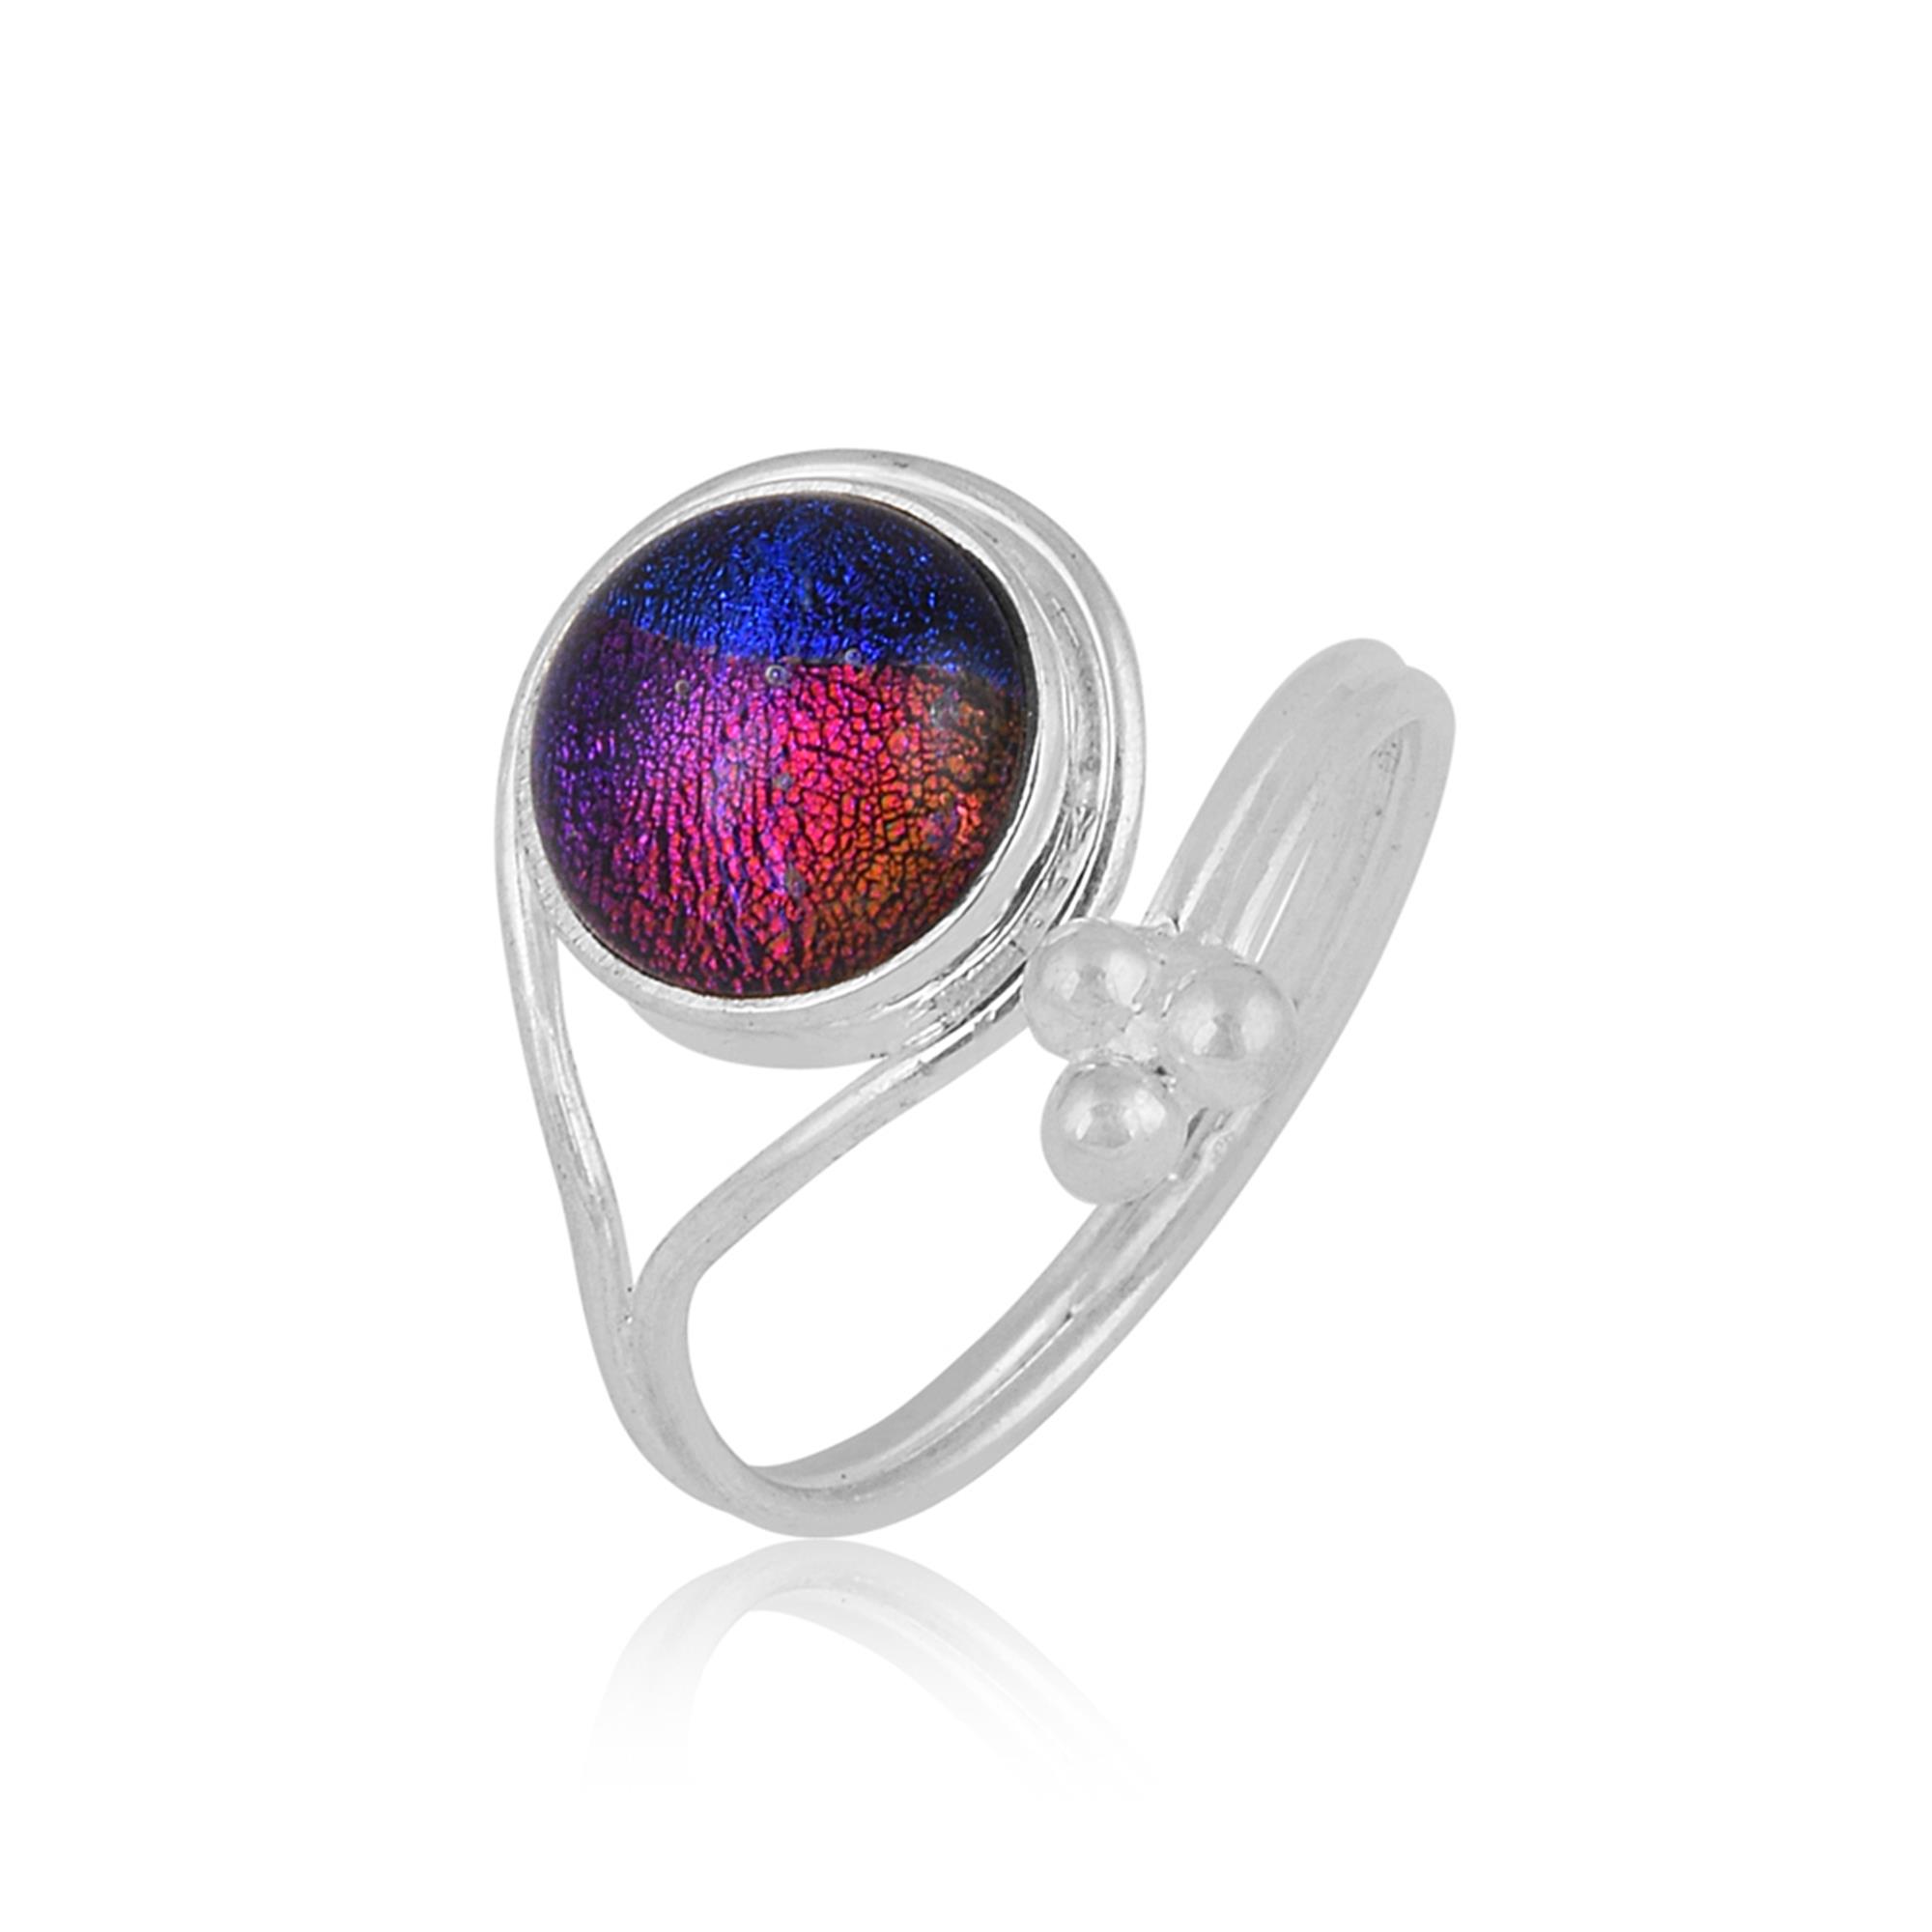 Dichroic glass Adjustable Ring in sterling silver 